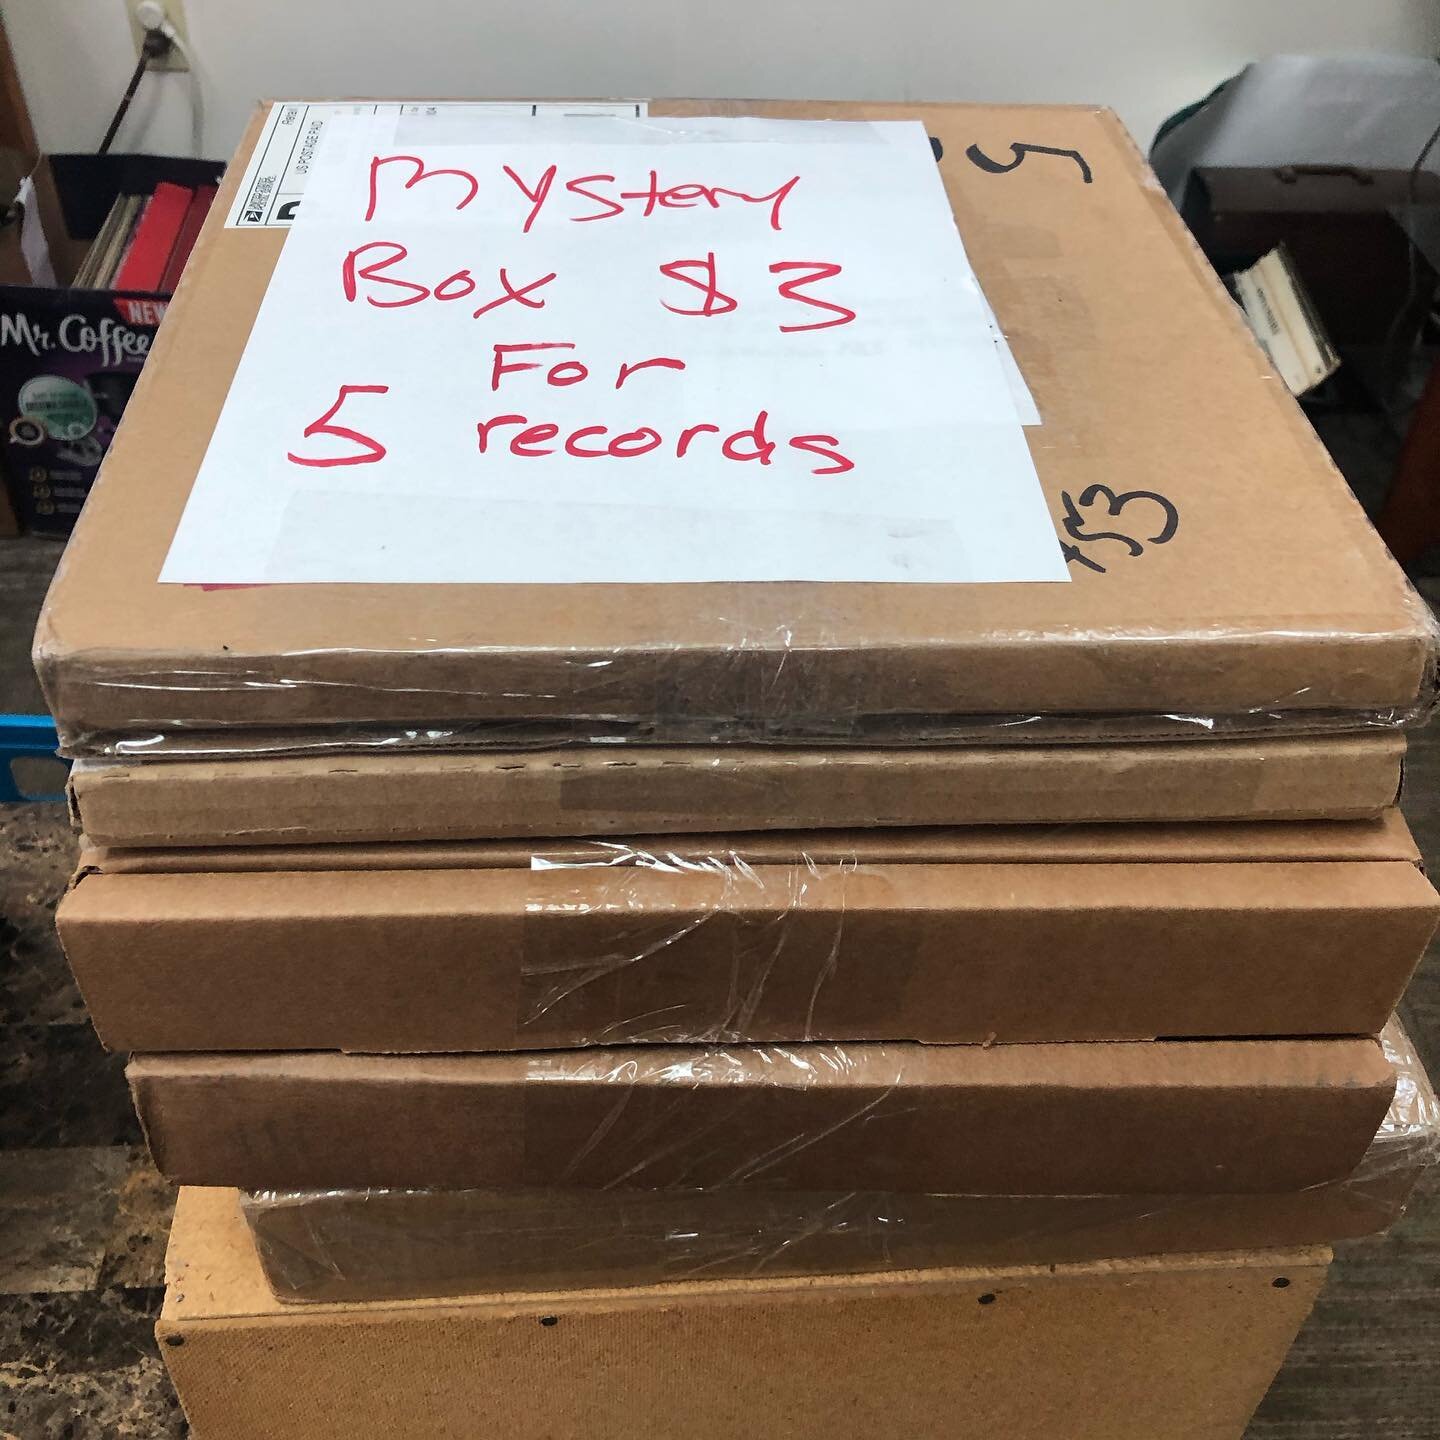 Due to popular demand: mystery boxes are back in three sizes/prices!!! There are 5, 10, &amp; 15 LP mystery boxes for $3, $5, &amp;, $7 respectively. Because of the overwhelming demand and affordability NO HOLDS store pick up only while supplies last